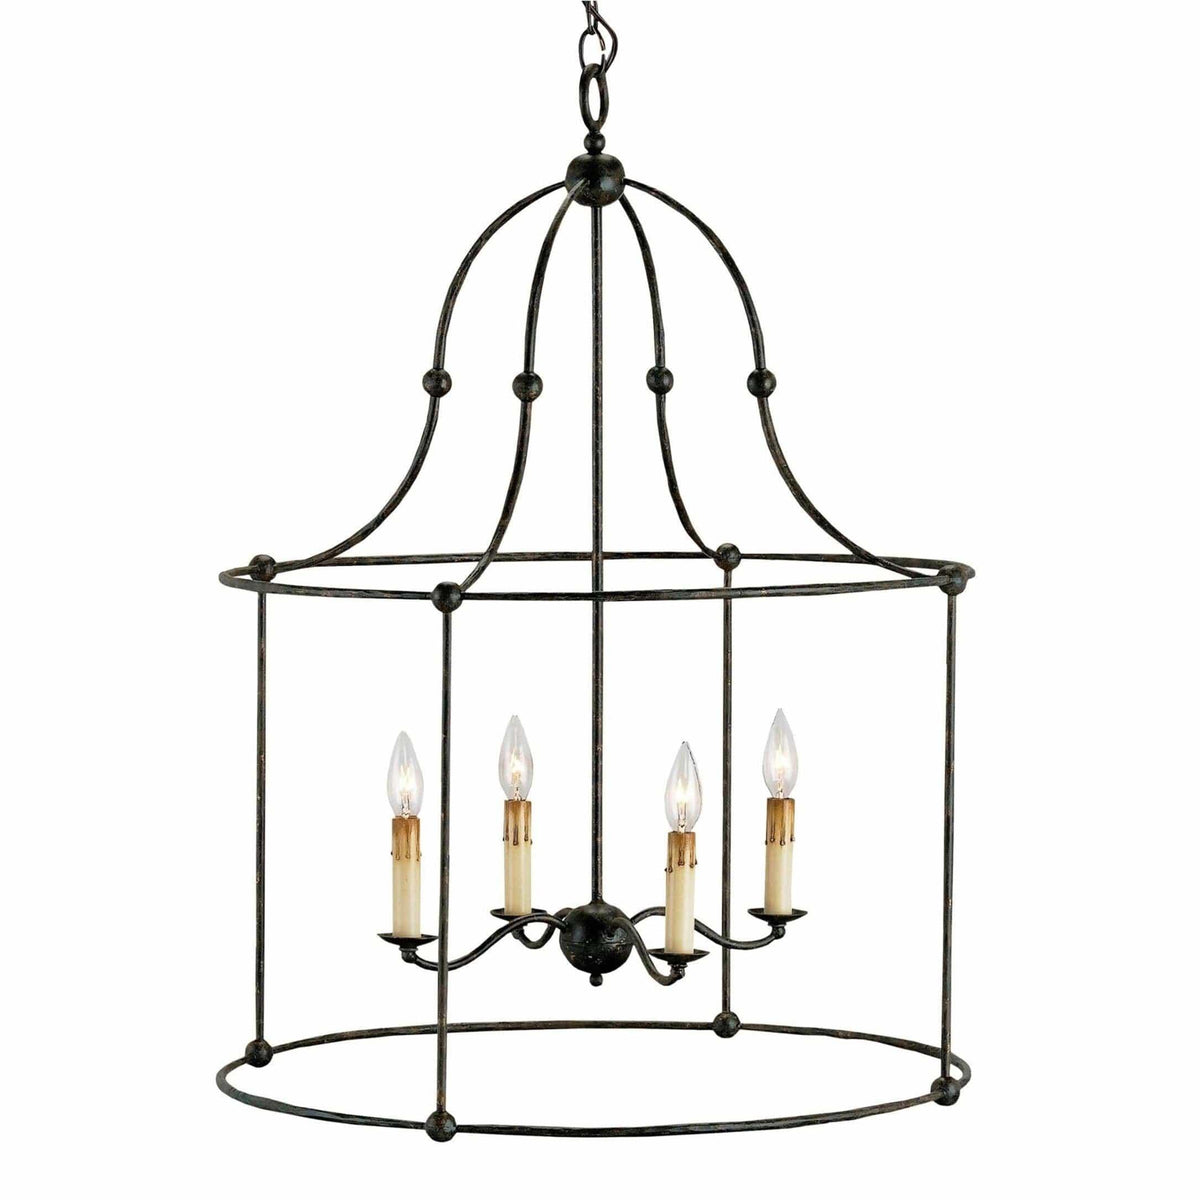 Currey and Company - Fitzjames Lantern - 9160 | Montreal Lighting & Hardware